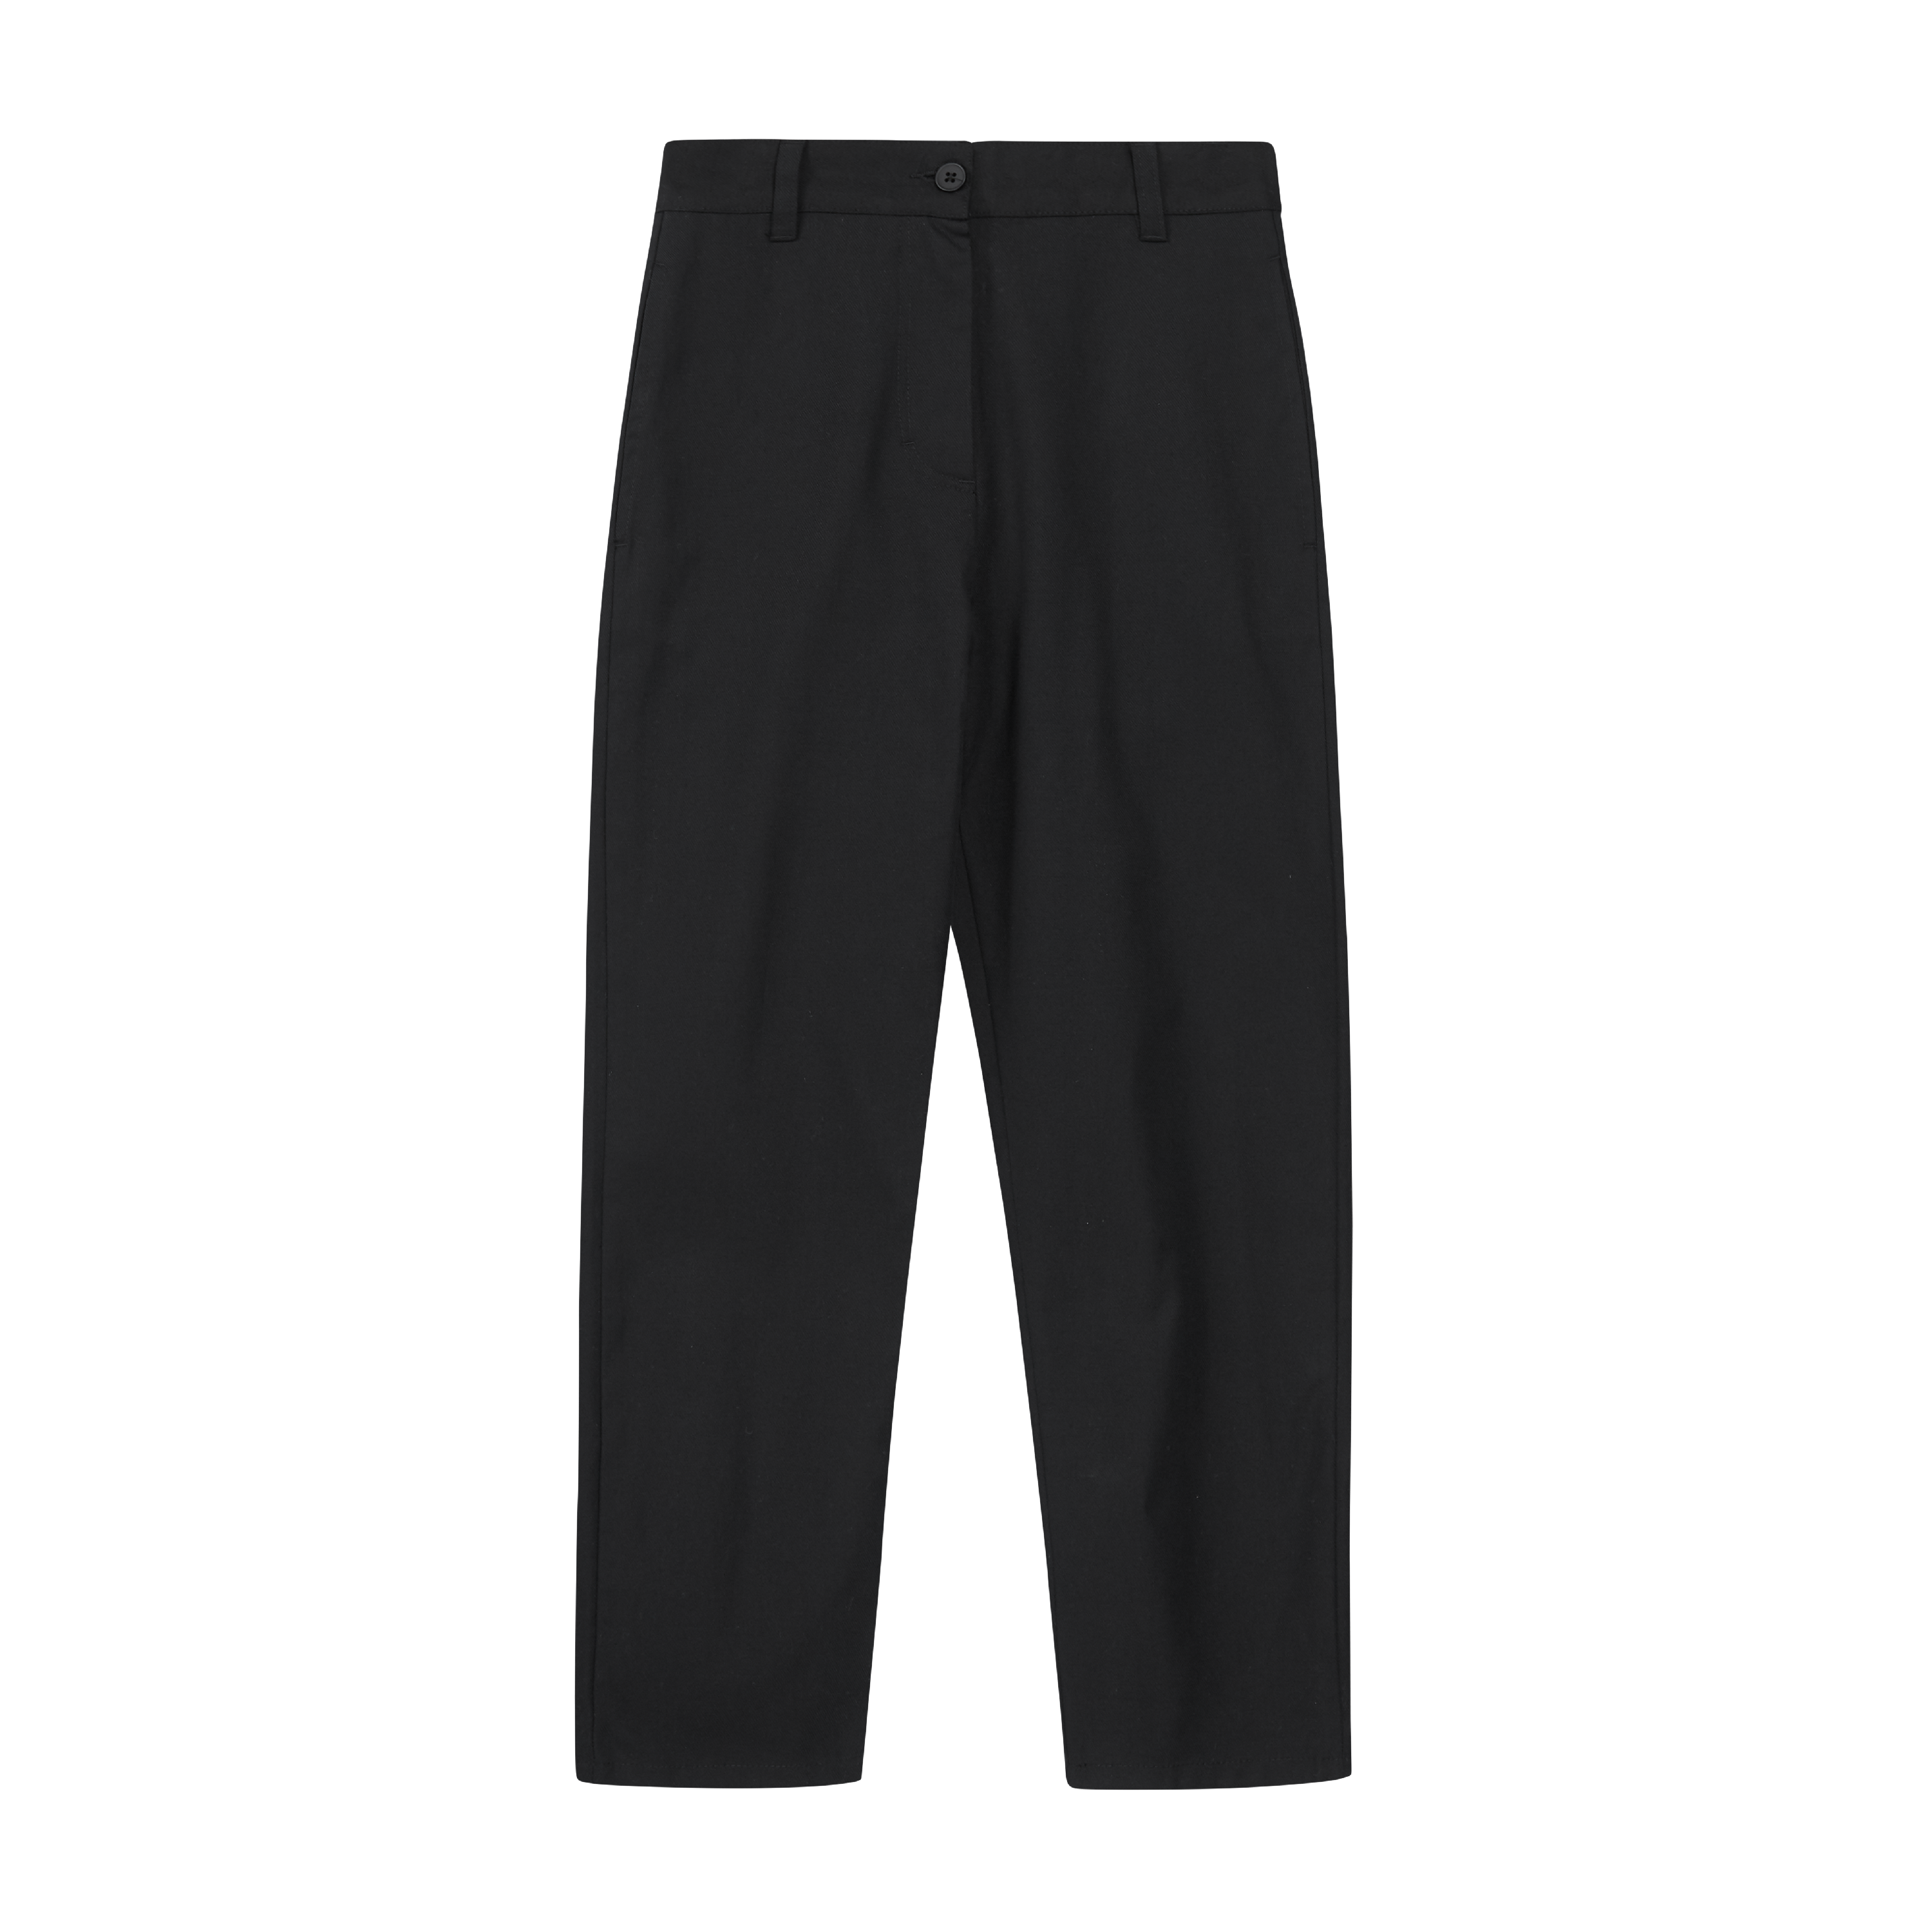 Keira Trousers